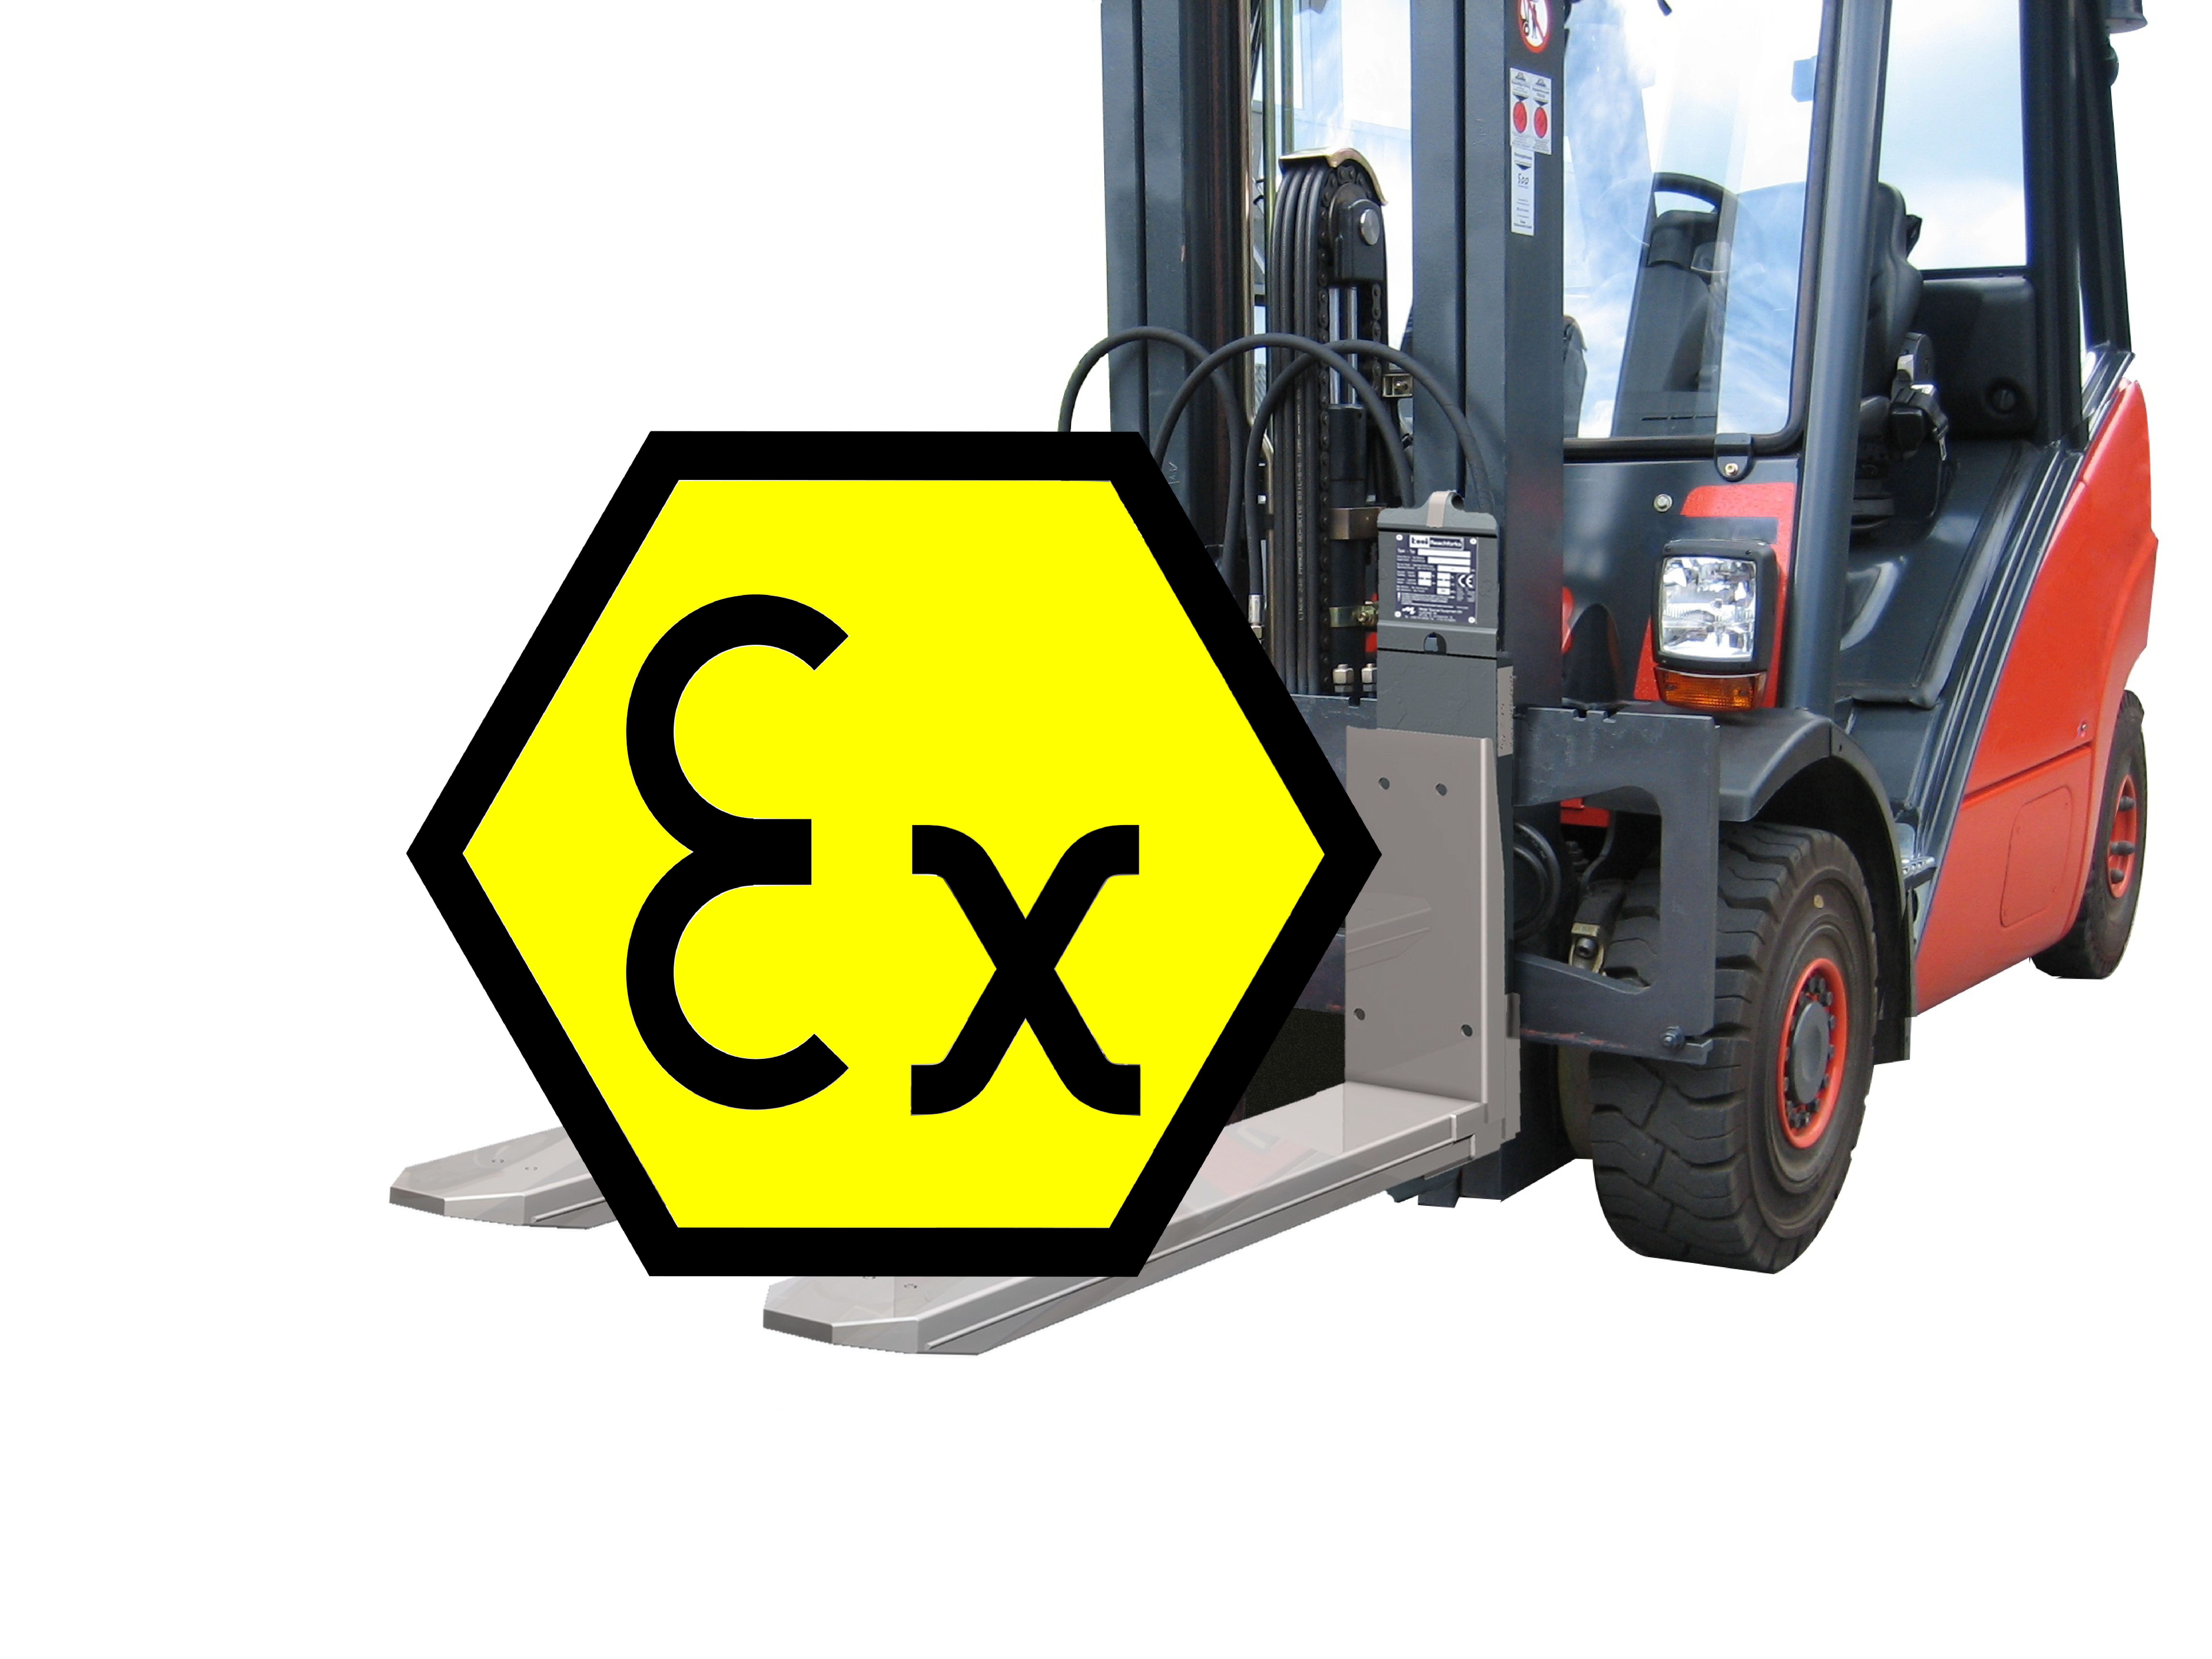 Hydraulically retractable and extendable forklift forks, KOOI-ReachForks, for ATEX applications.